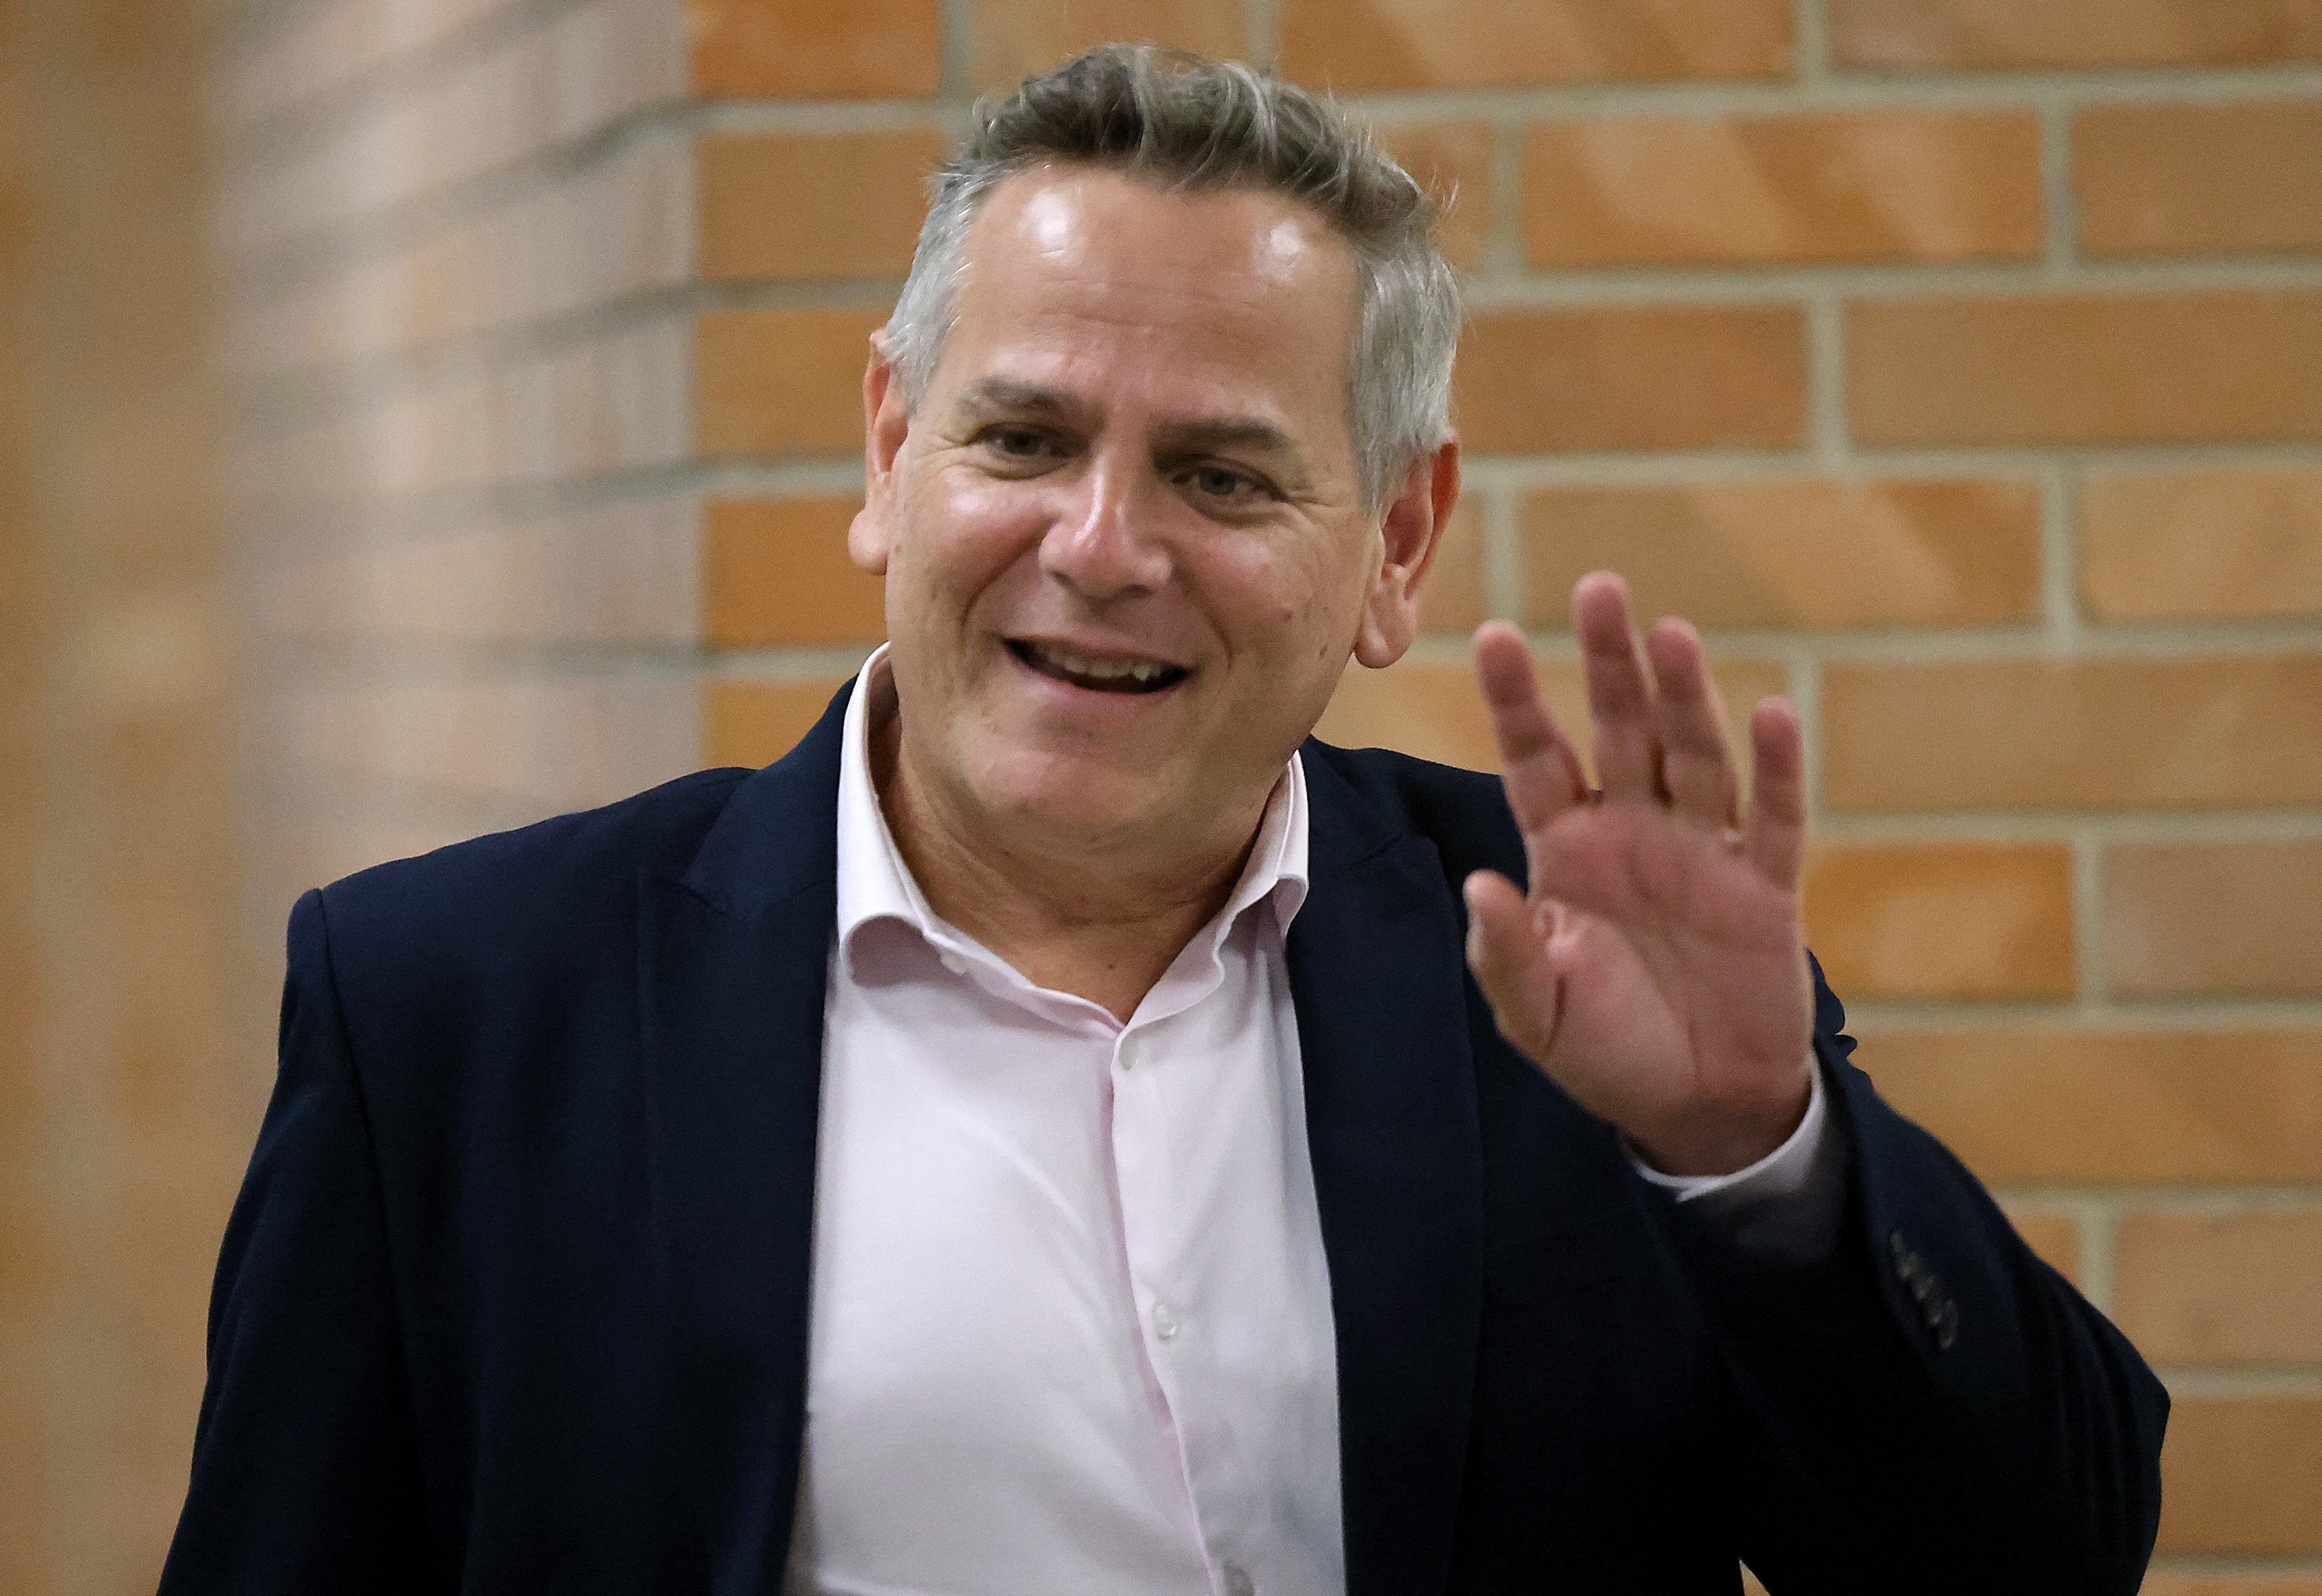 Israeli politician Nitzan Horowitz of the Meretz party waves as he arrives to attend a parliamentary meeting at the Knesset in Jerusalem, ahead of a vote on a new government, on 13 June, 2021. (AFP)